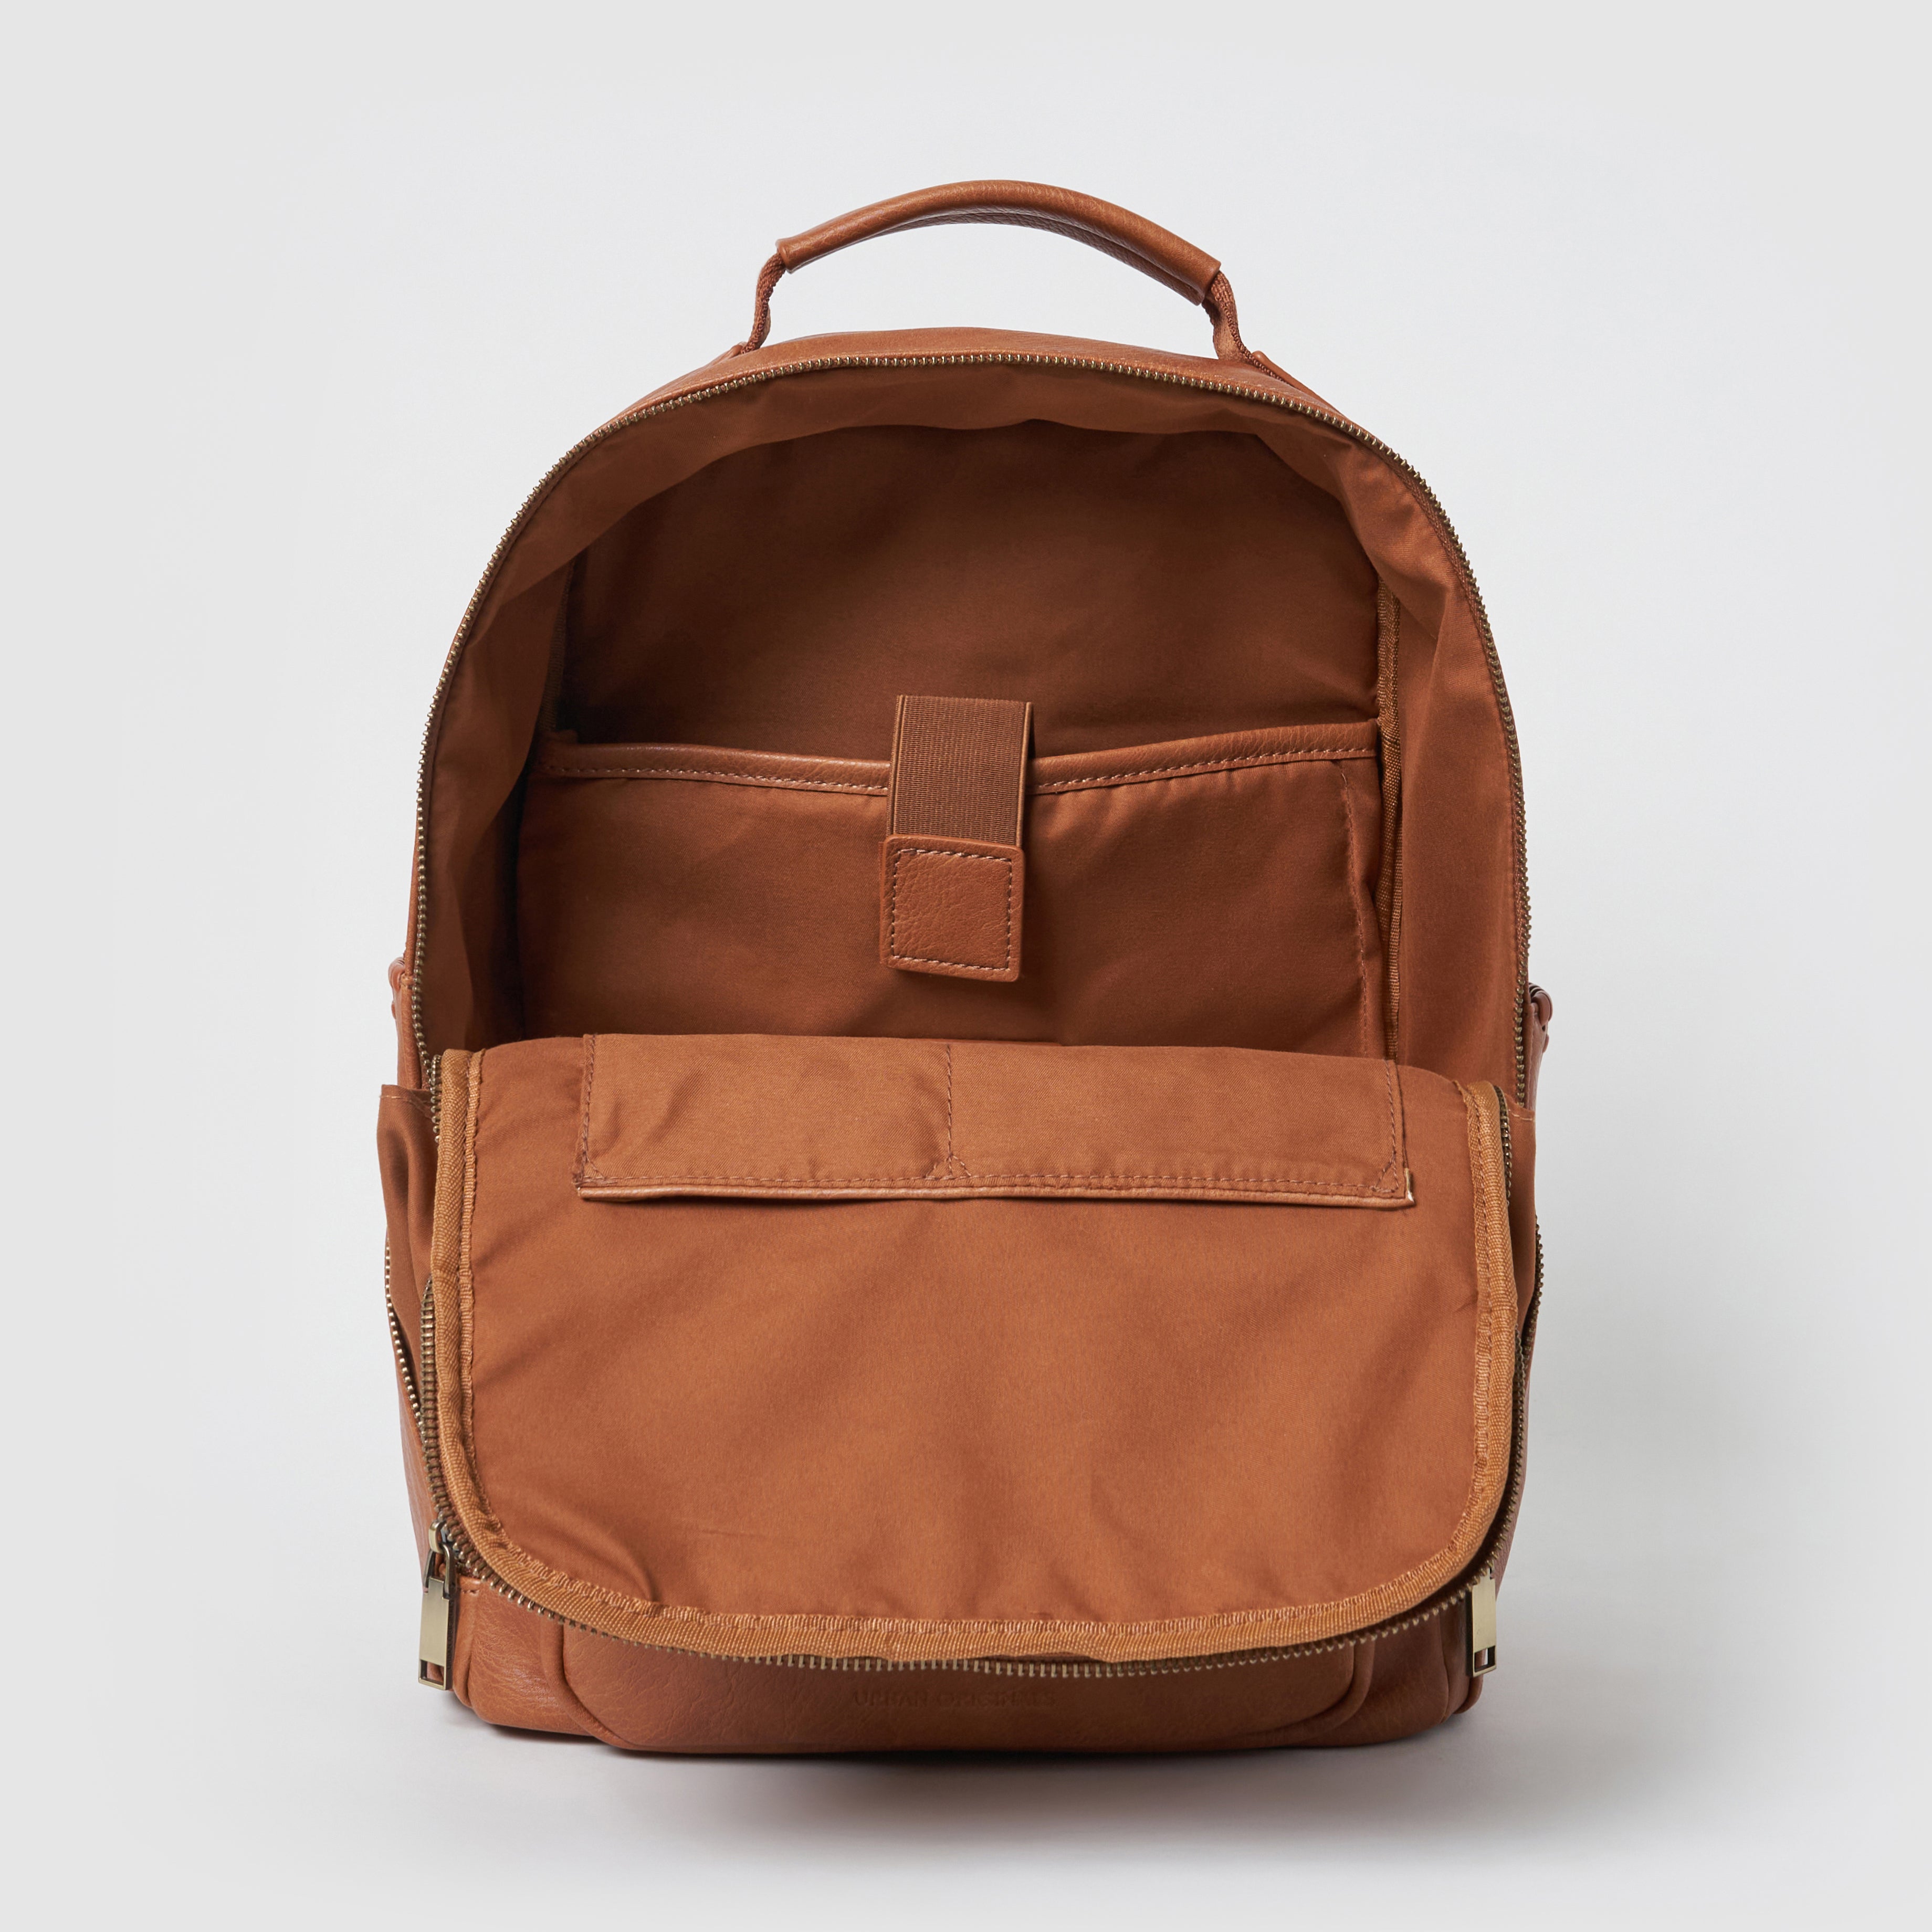 Astra Backpack - Tan